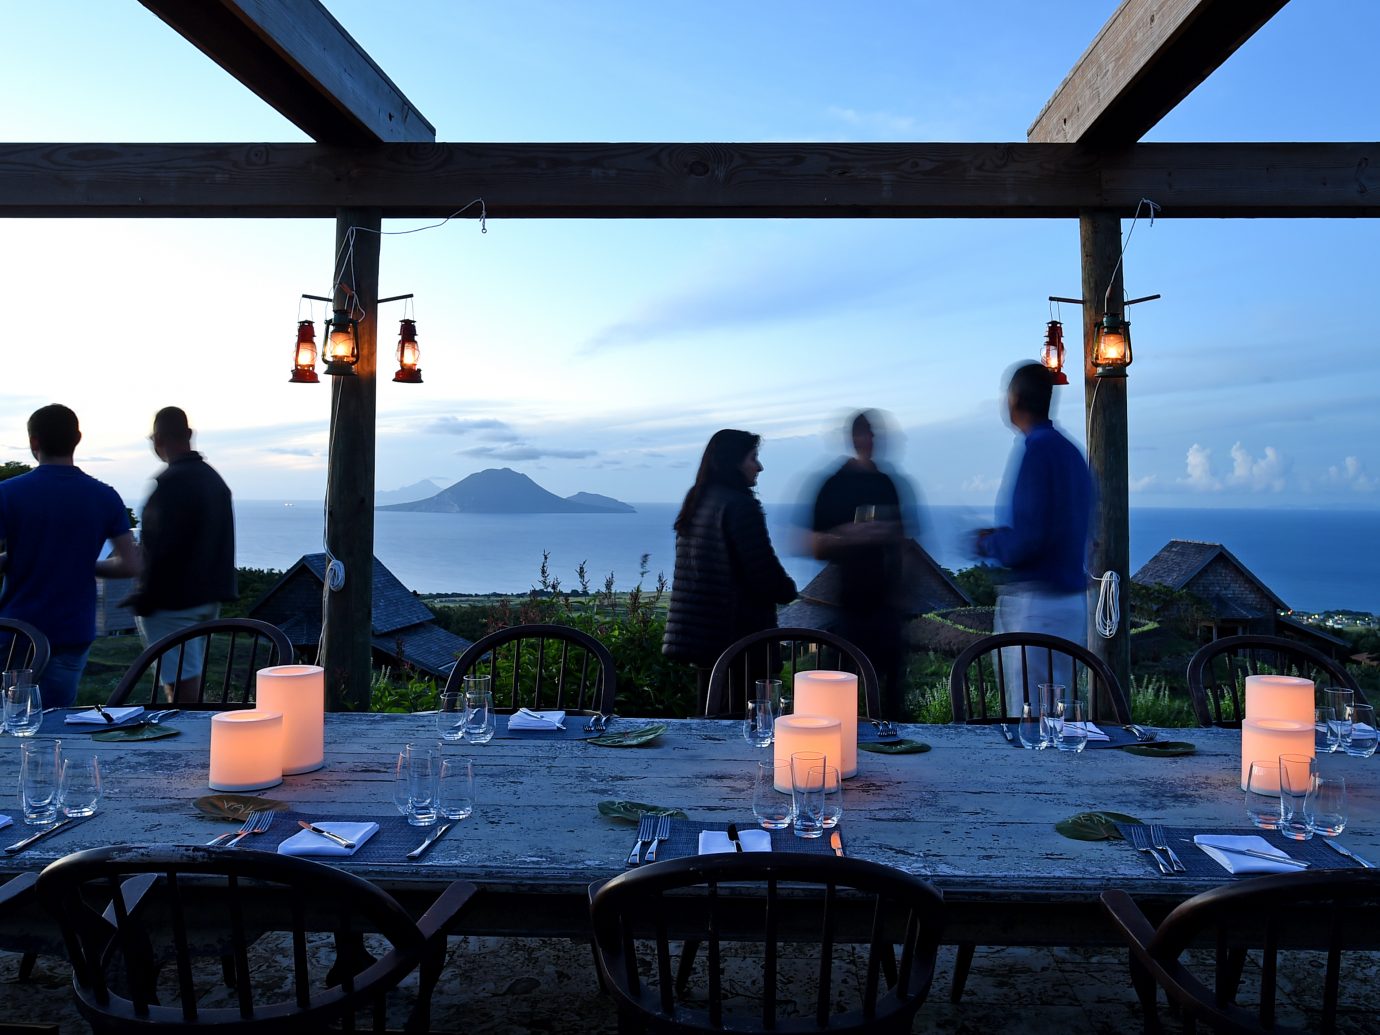 Farm to table experience with people socializing at dusk with a beautiful background